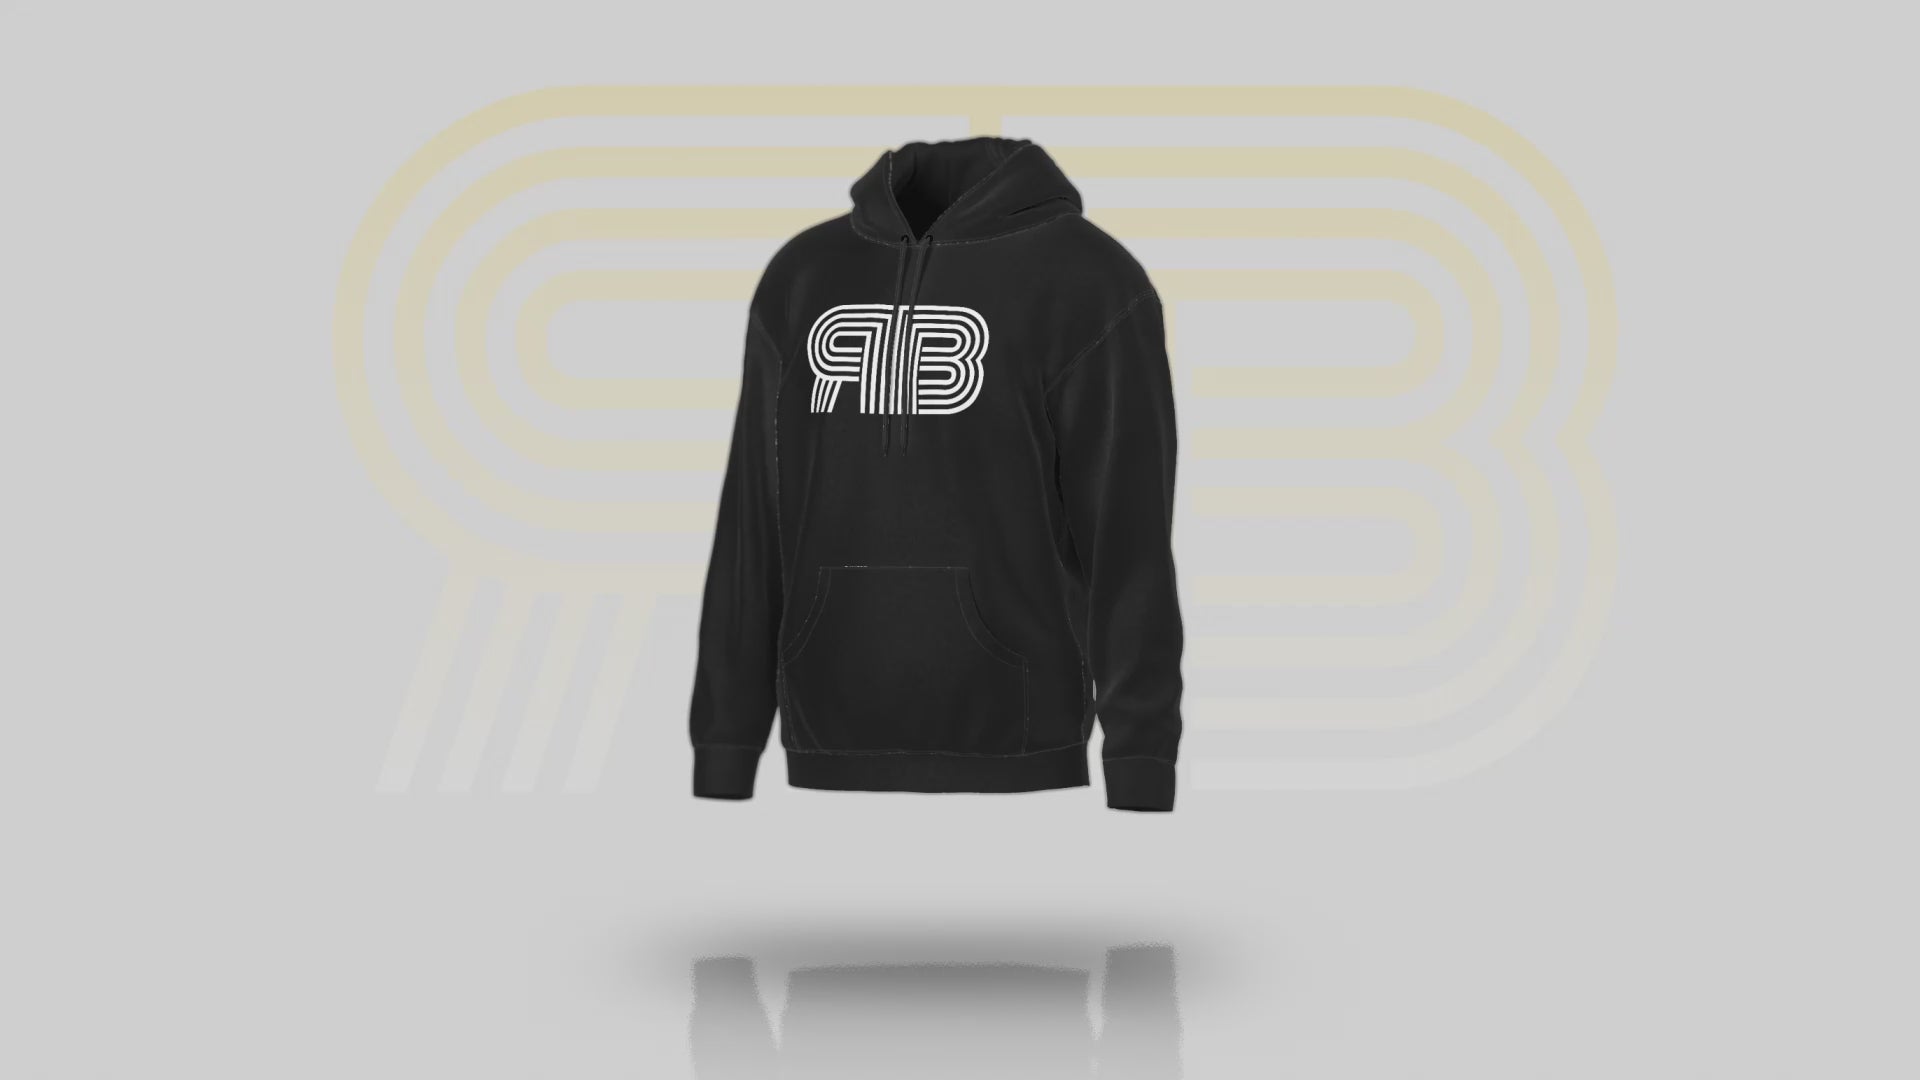 Load video: Join the RAW Breed team with your own RB Hoodie